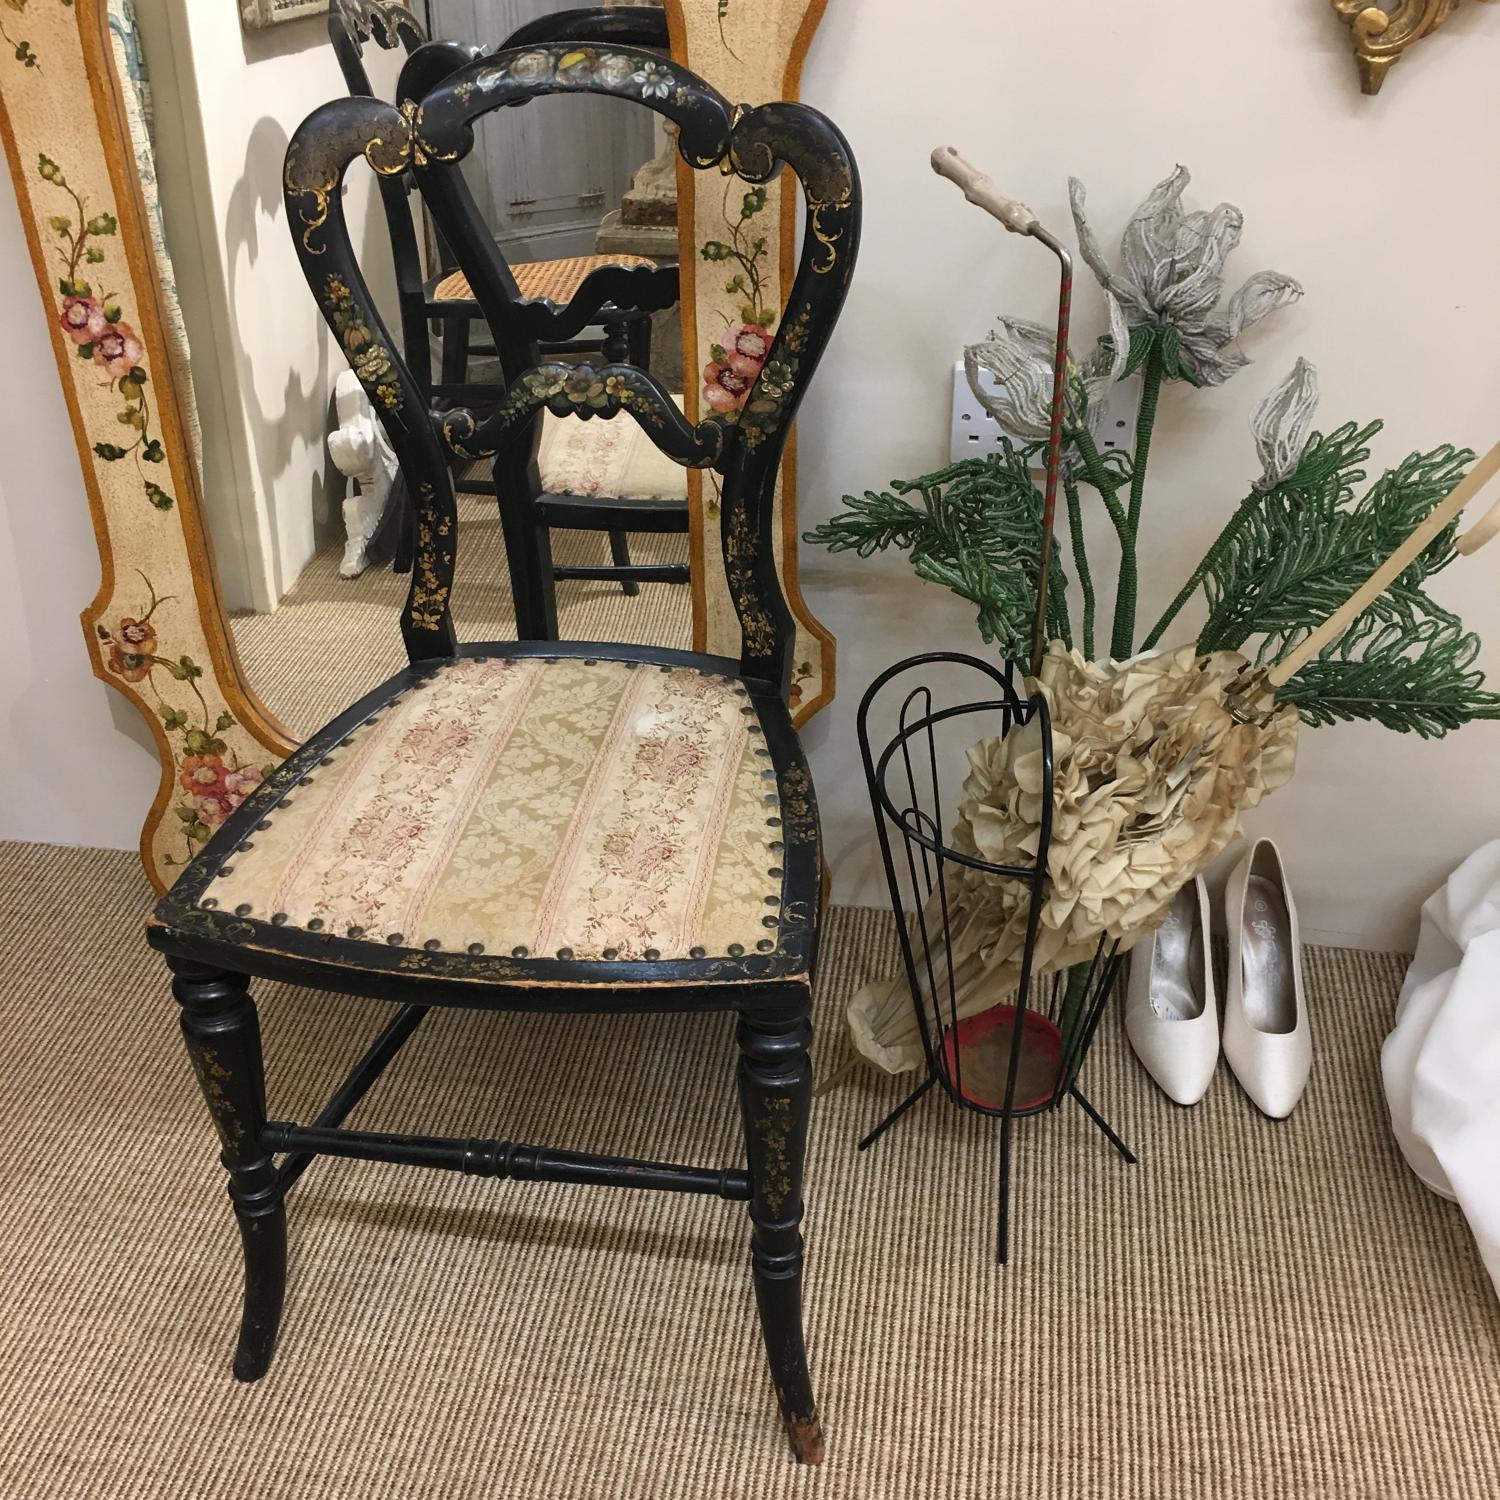 Antique lacquered chair with painted decoration